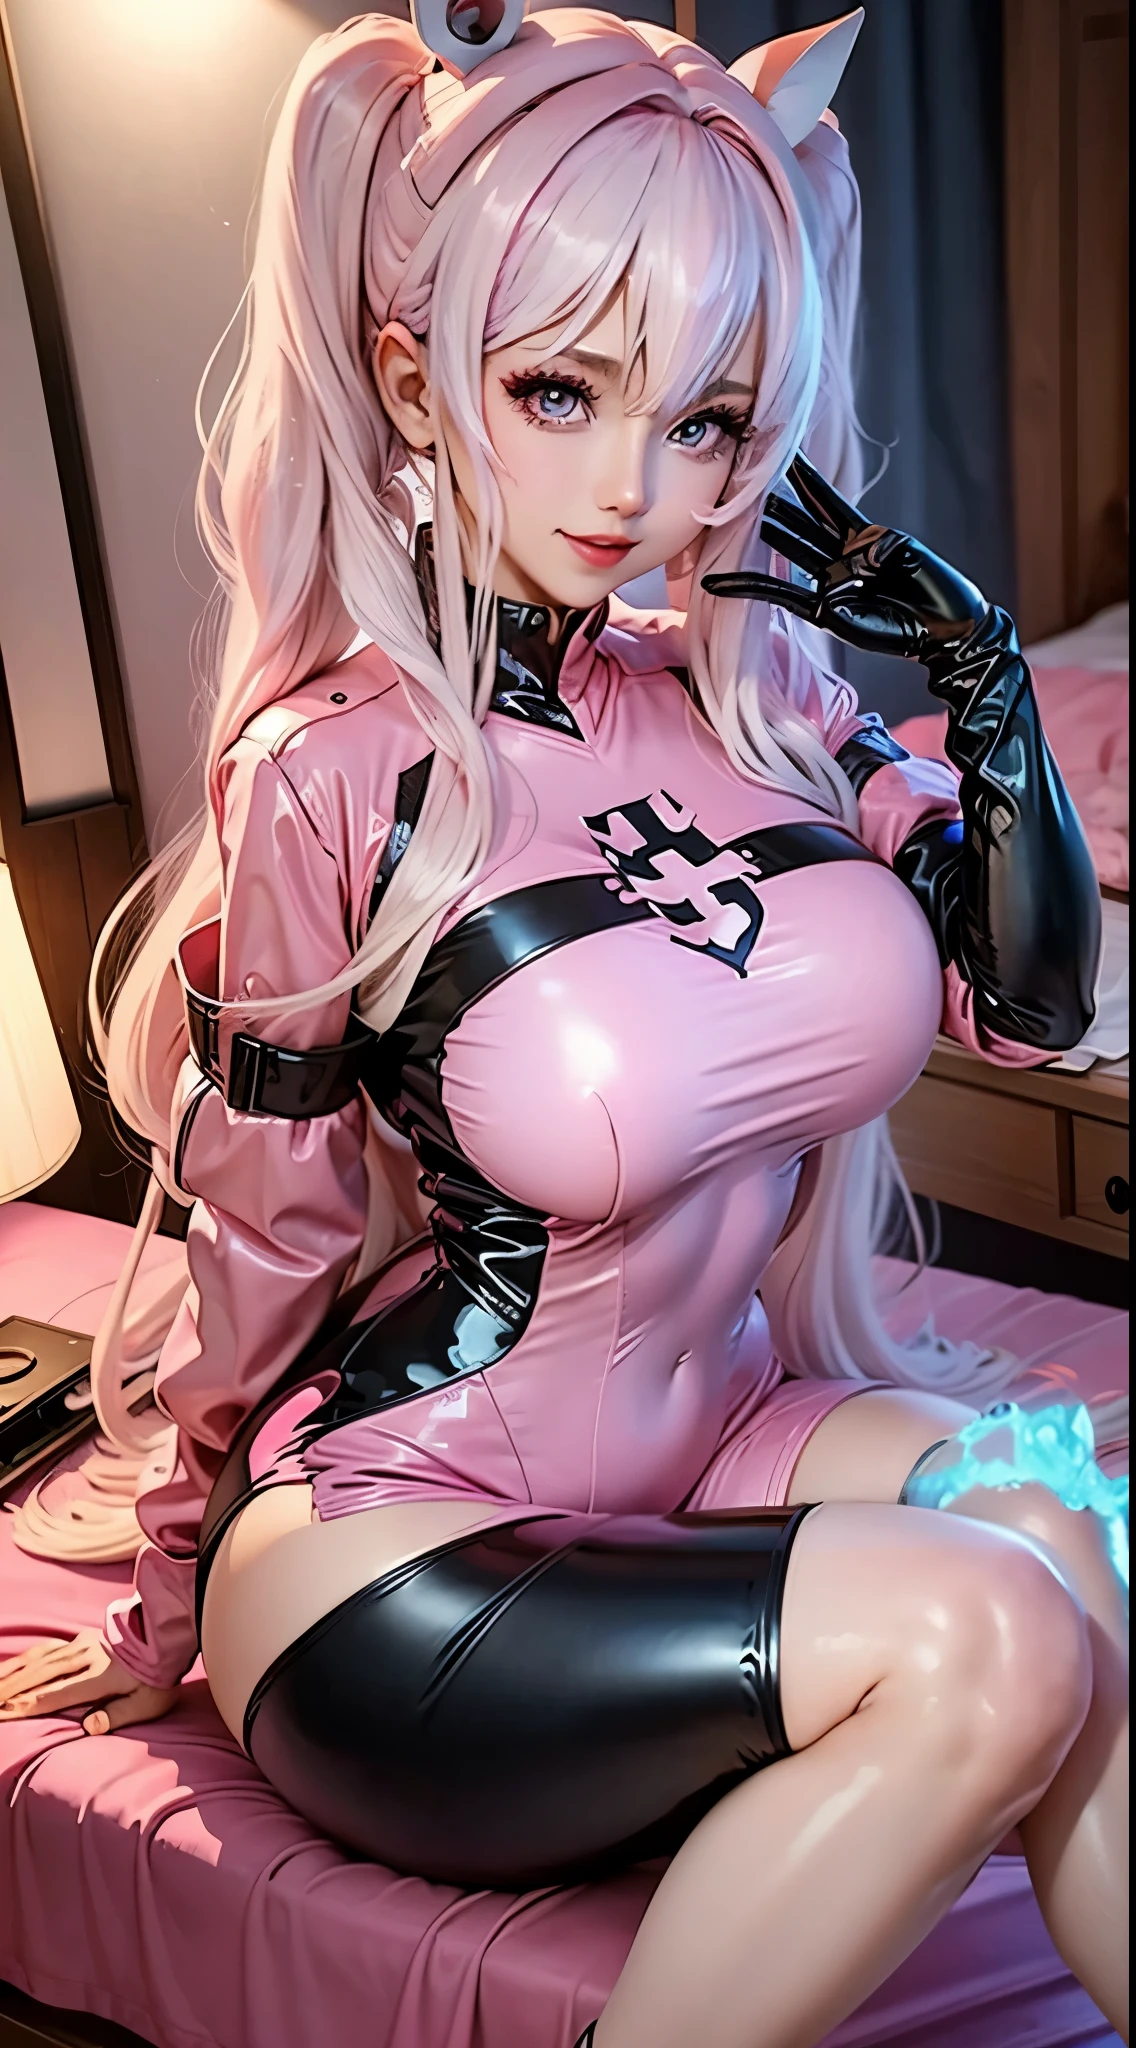 8k, Ultra Macro Photography, (masterpiece, best quality), age mid 20s, ((Alice)): character from Goddess of Victory, waifu, realistic, inside environment, dark room, ((bedroom)),
shiny pink latex, skintight latex, long sleeve one piece outfit, beautiful face, long bangs, long hair, two pigtails hairstyle, white hair w/pink highlights, pink eyes, eyelashes, (standing), side booty, :D
defined thick thighs, hourglass body, ((huge breasts)), underboob, 
sitting on bed, (leaning forward), zoom in face